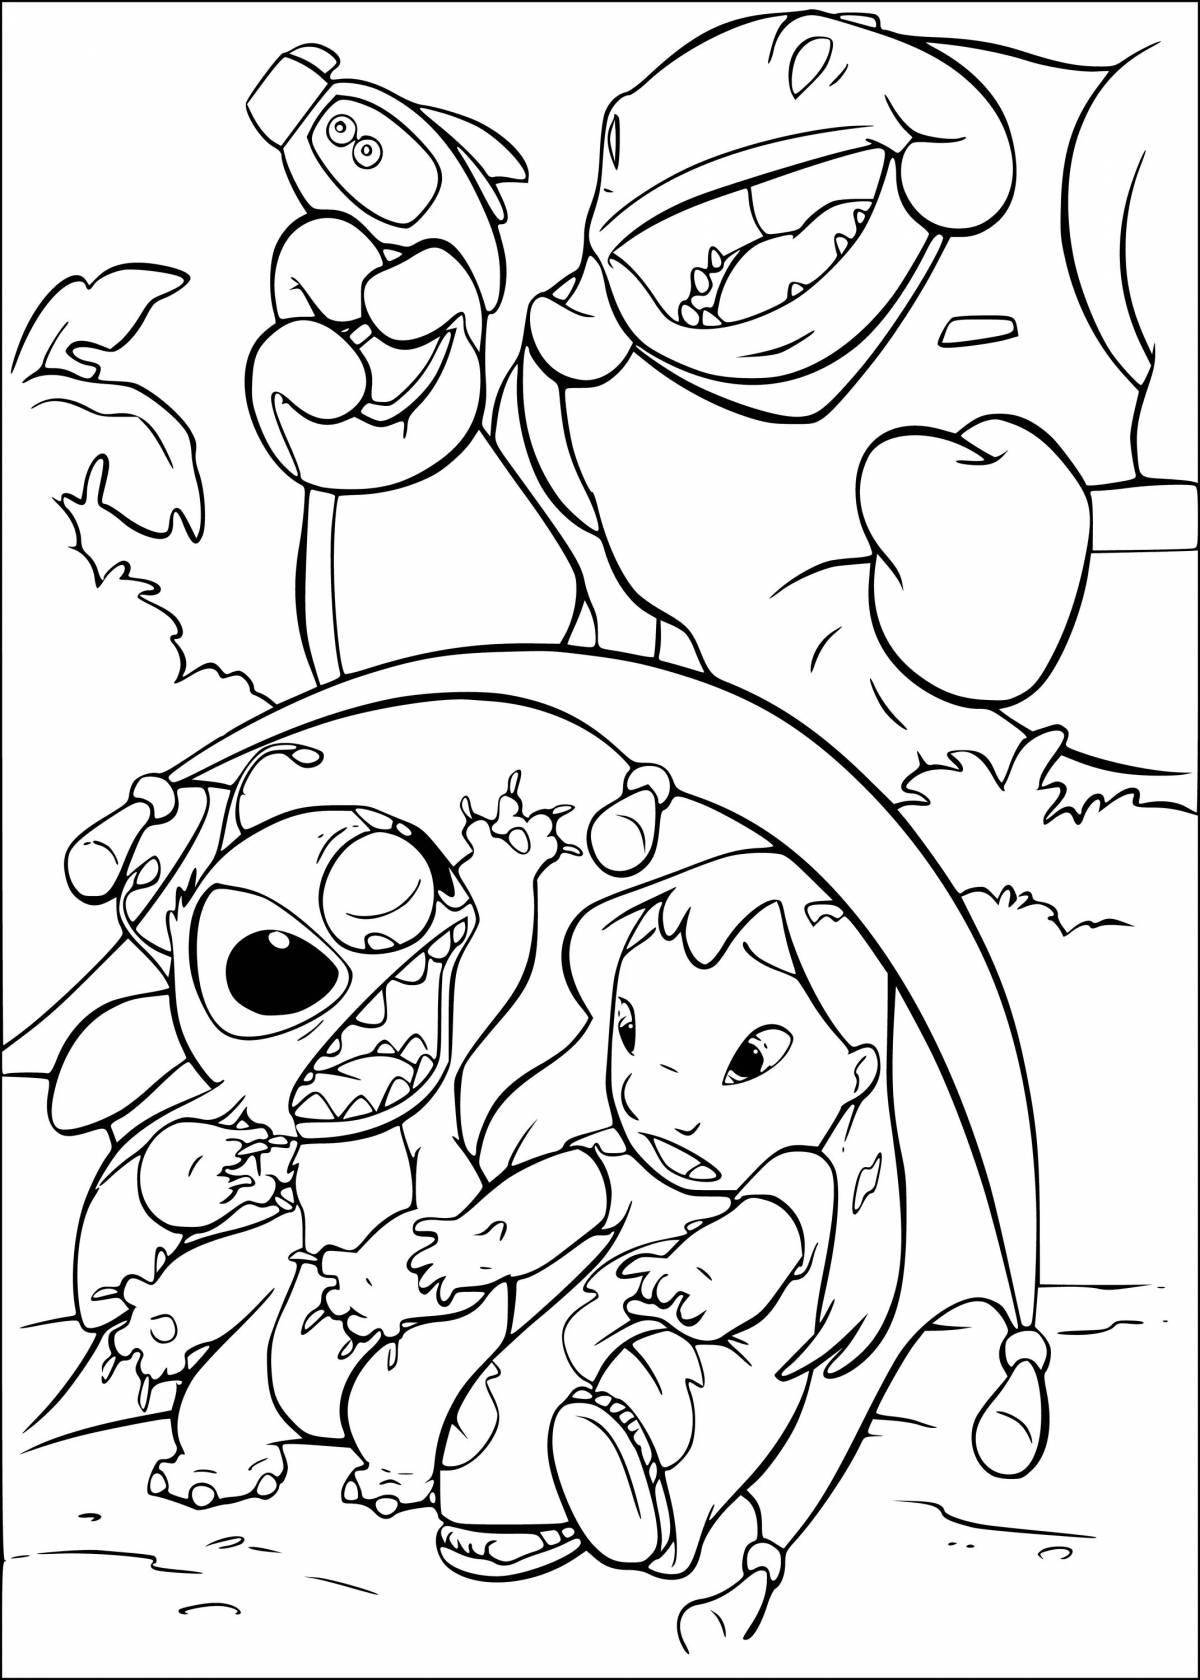 Fairytale coloring book for girls lilo and stitch